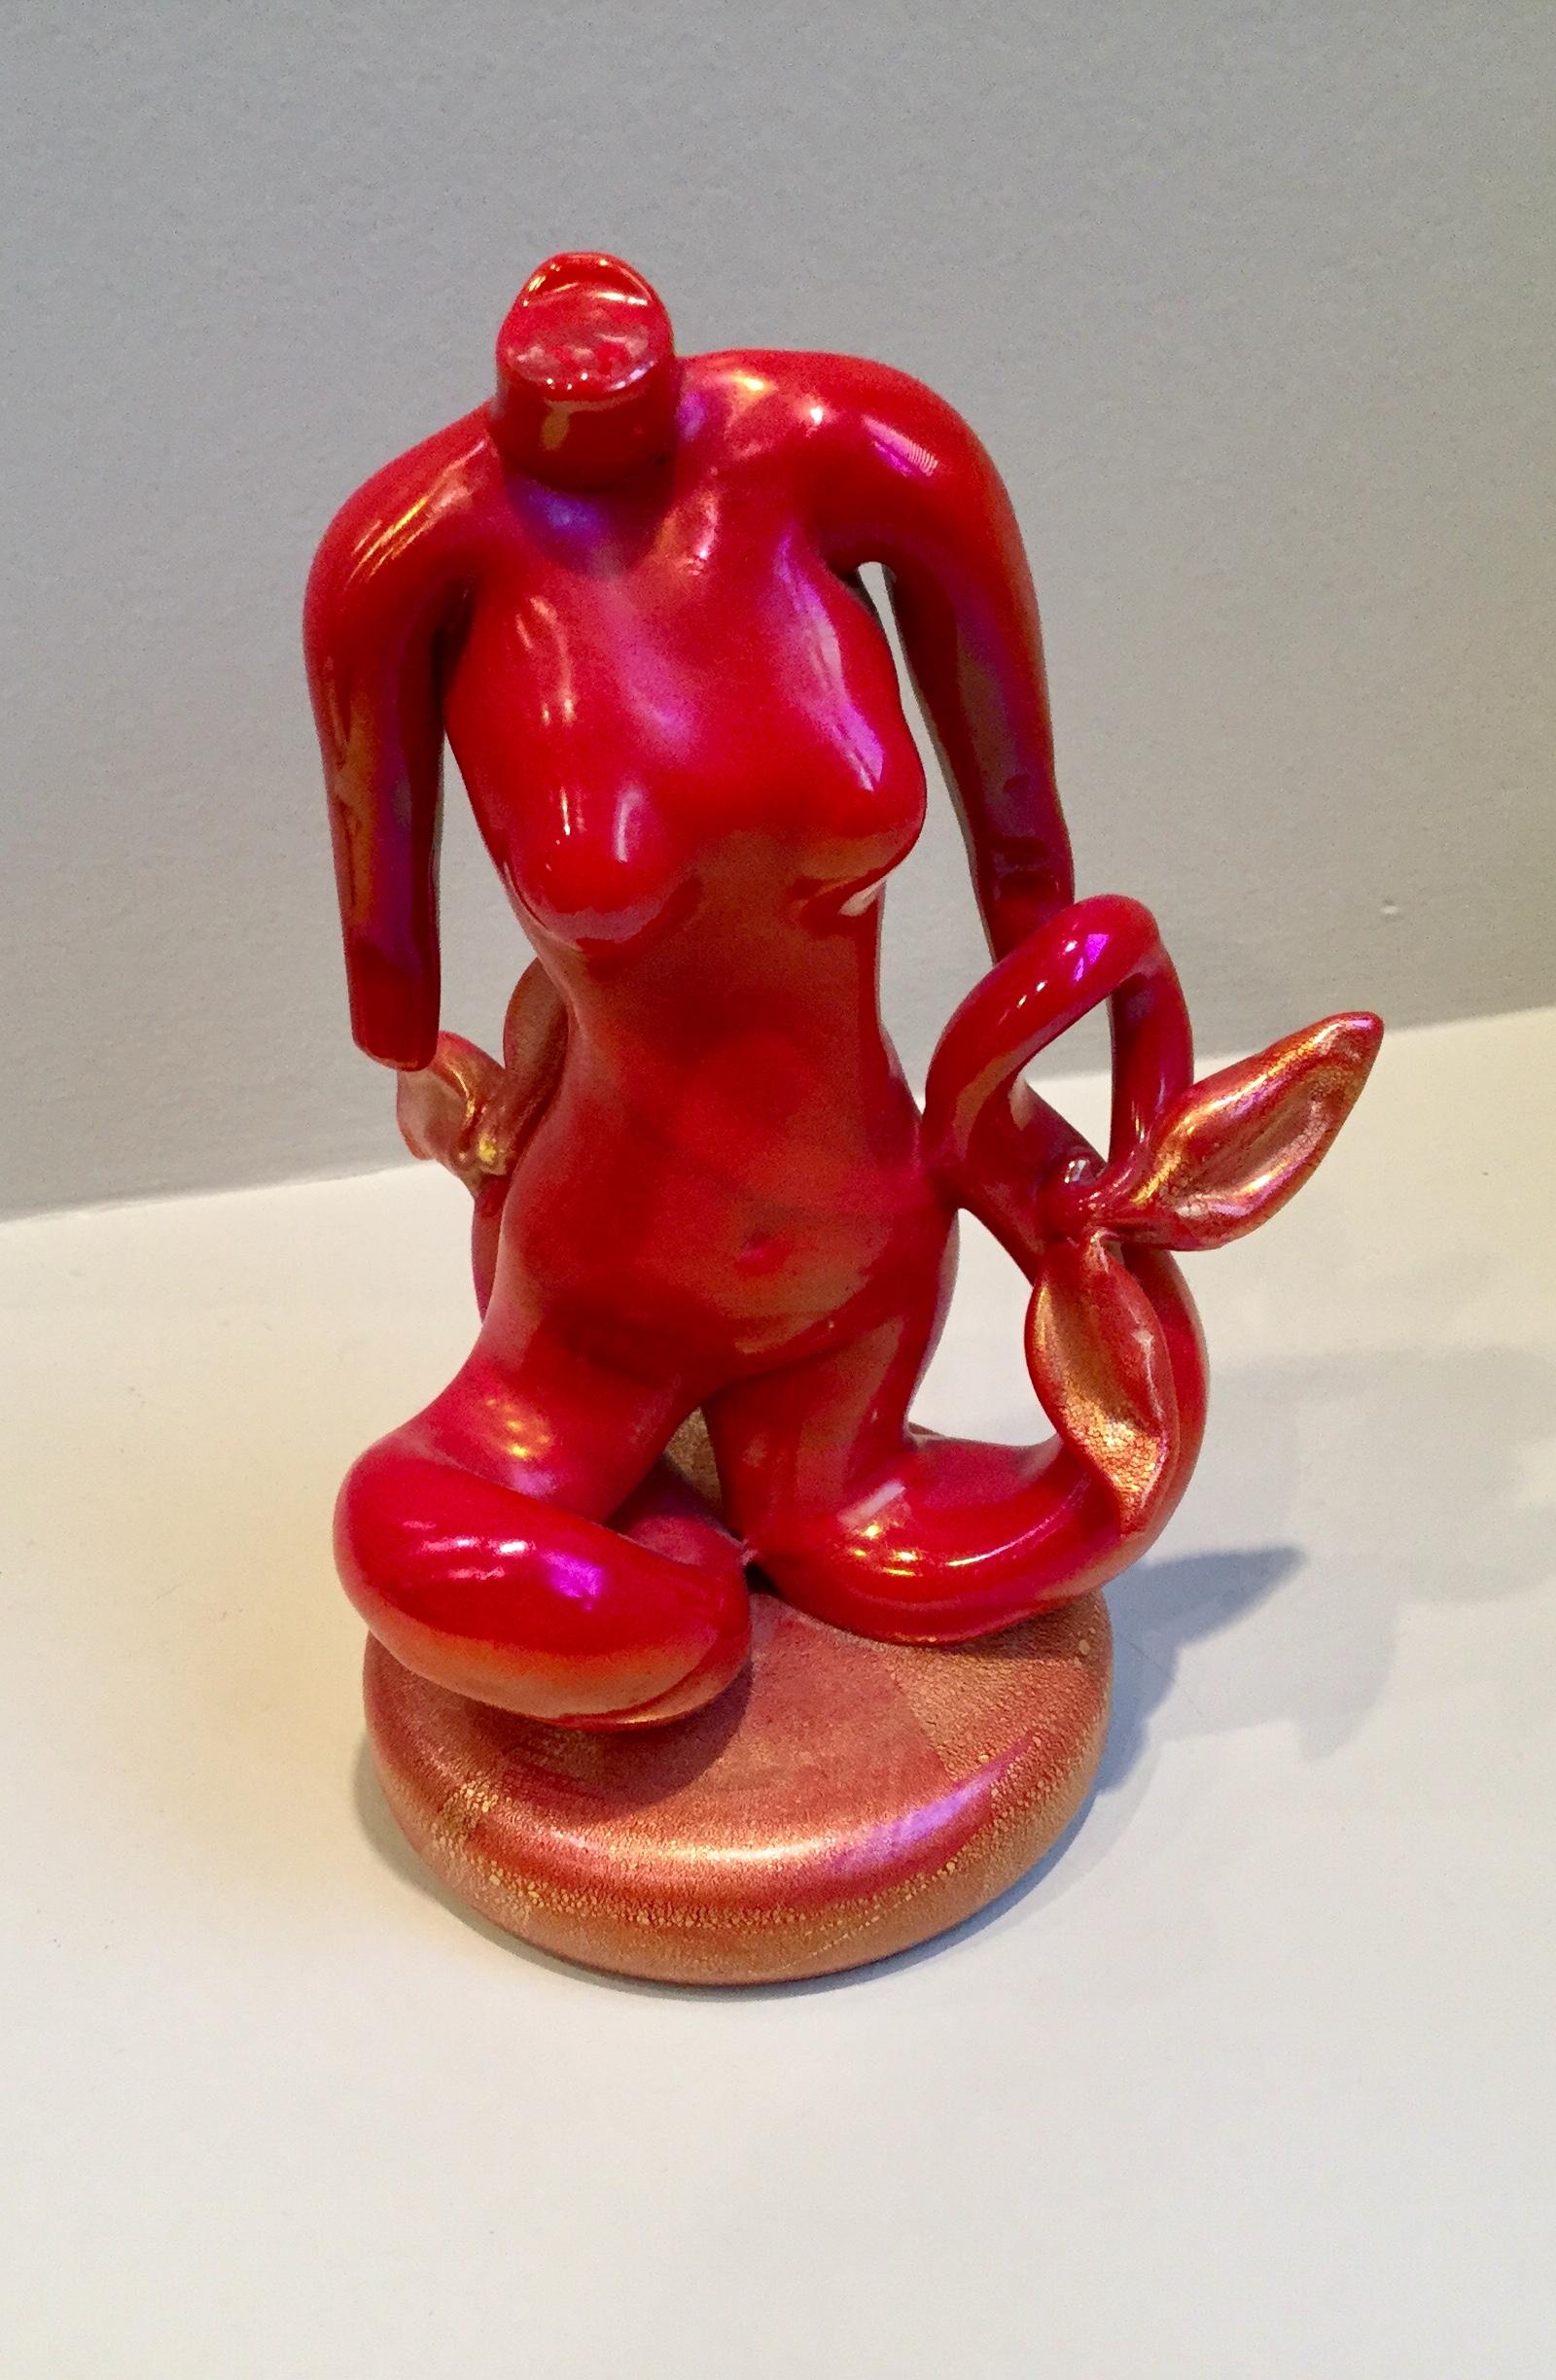 Red Pasta glass figural nude Sirene after a design by Eugene Berman and Napoleone Martinuzzi. Alfredo Barbini made these red pasta figures in the 1970s and early 1980s for Pauly and Company. Very scarce and limited production.